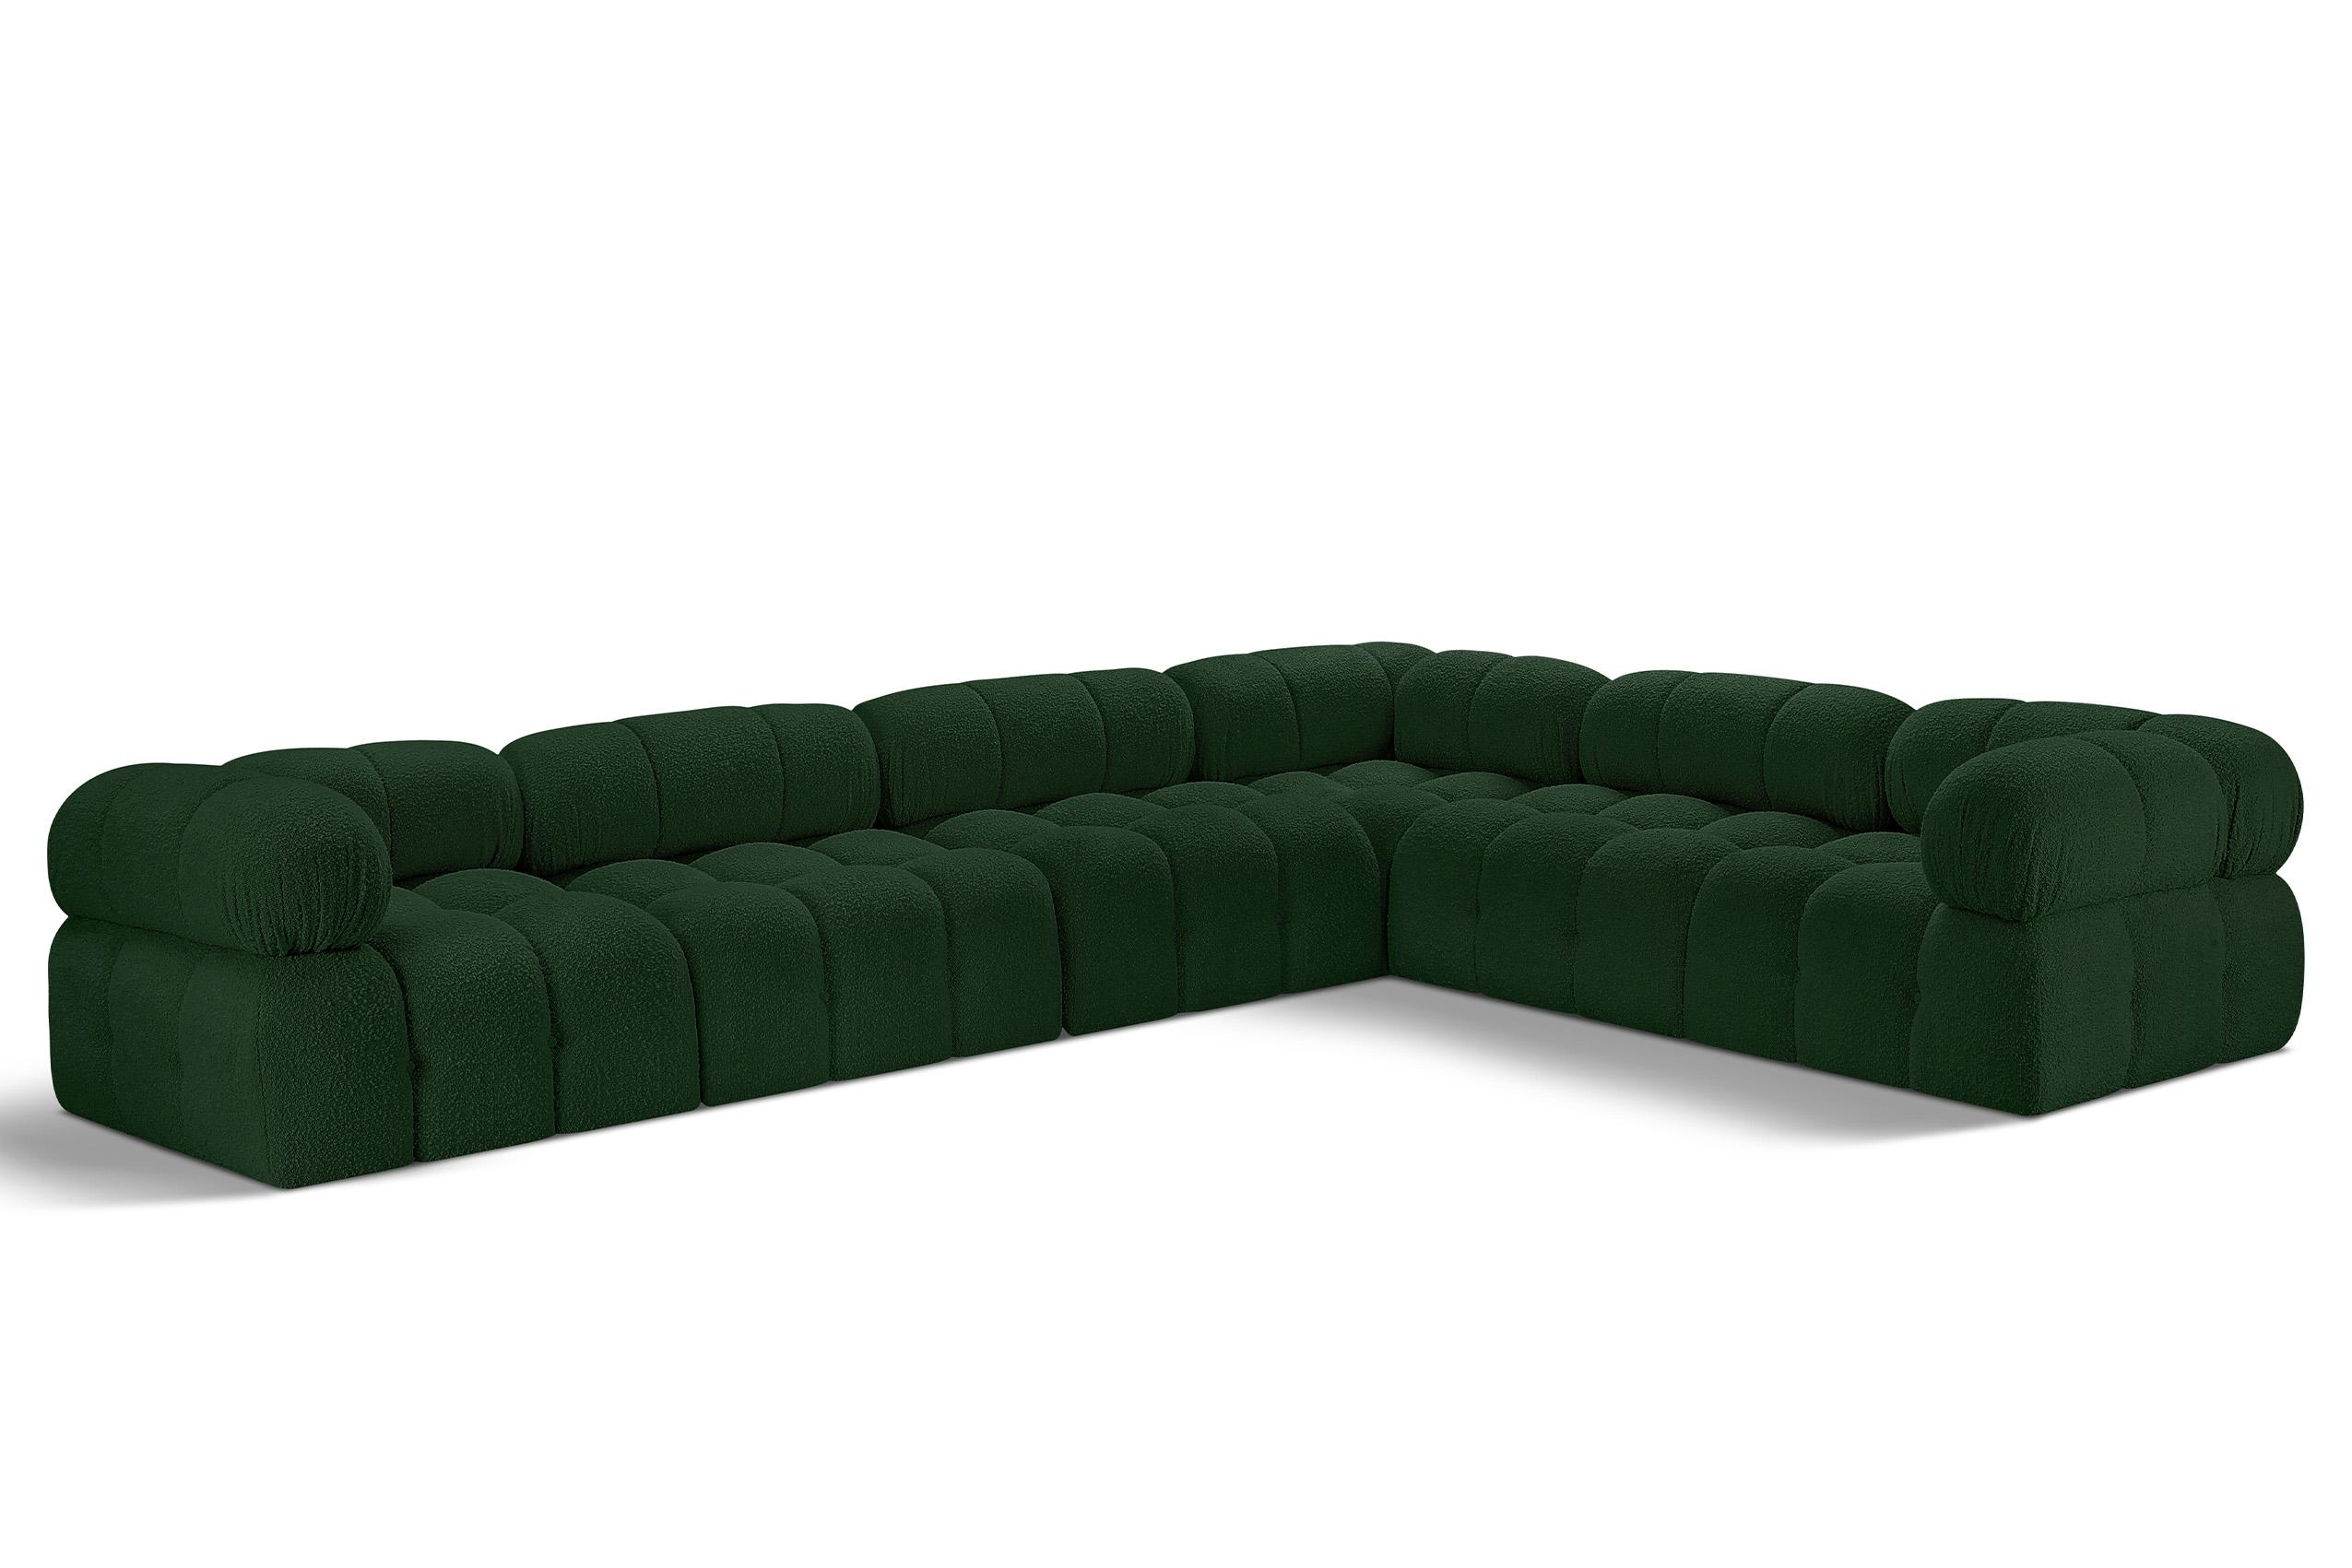 Contemporary, Modern Modular Sectional AMES 611Green-Sec6F 611Green-Sec6F in Green 